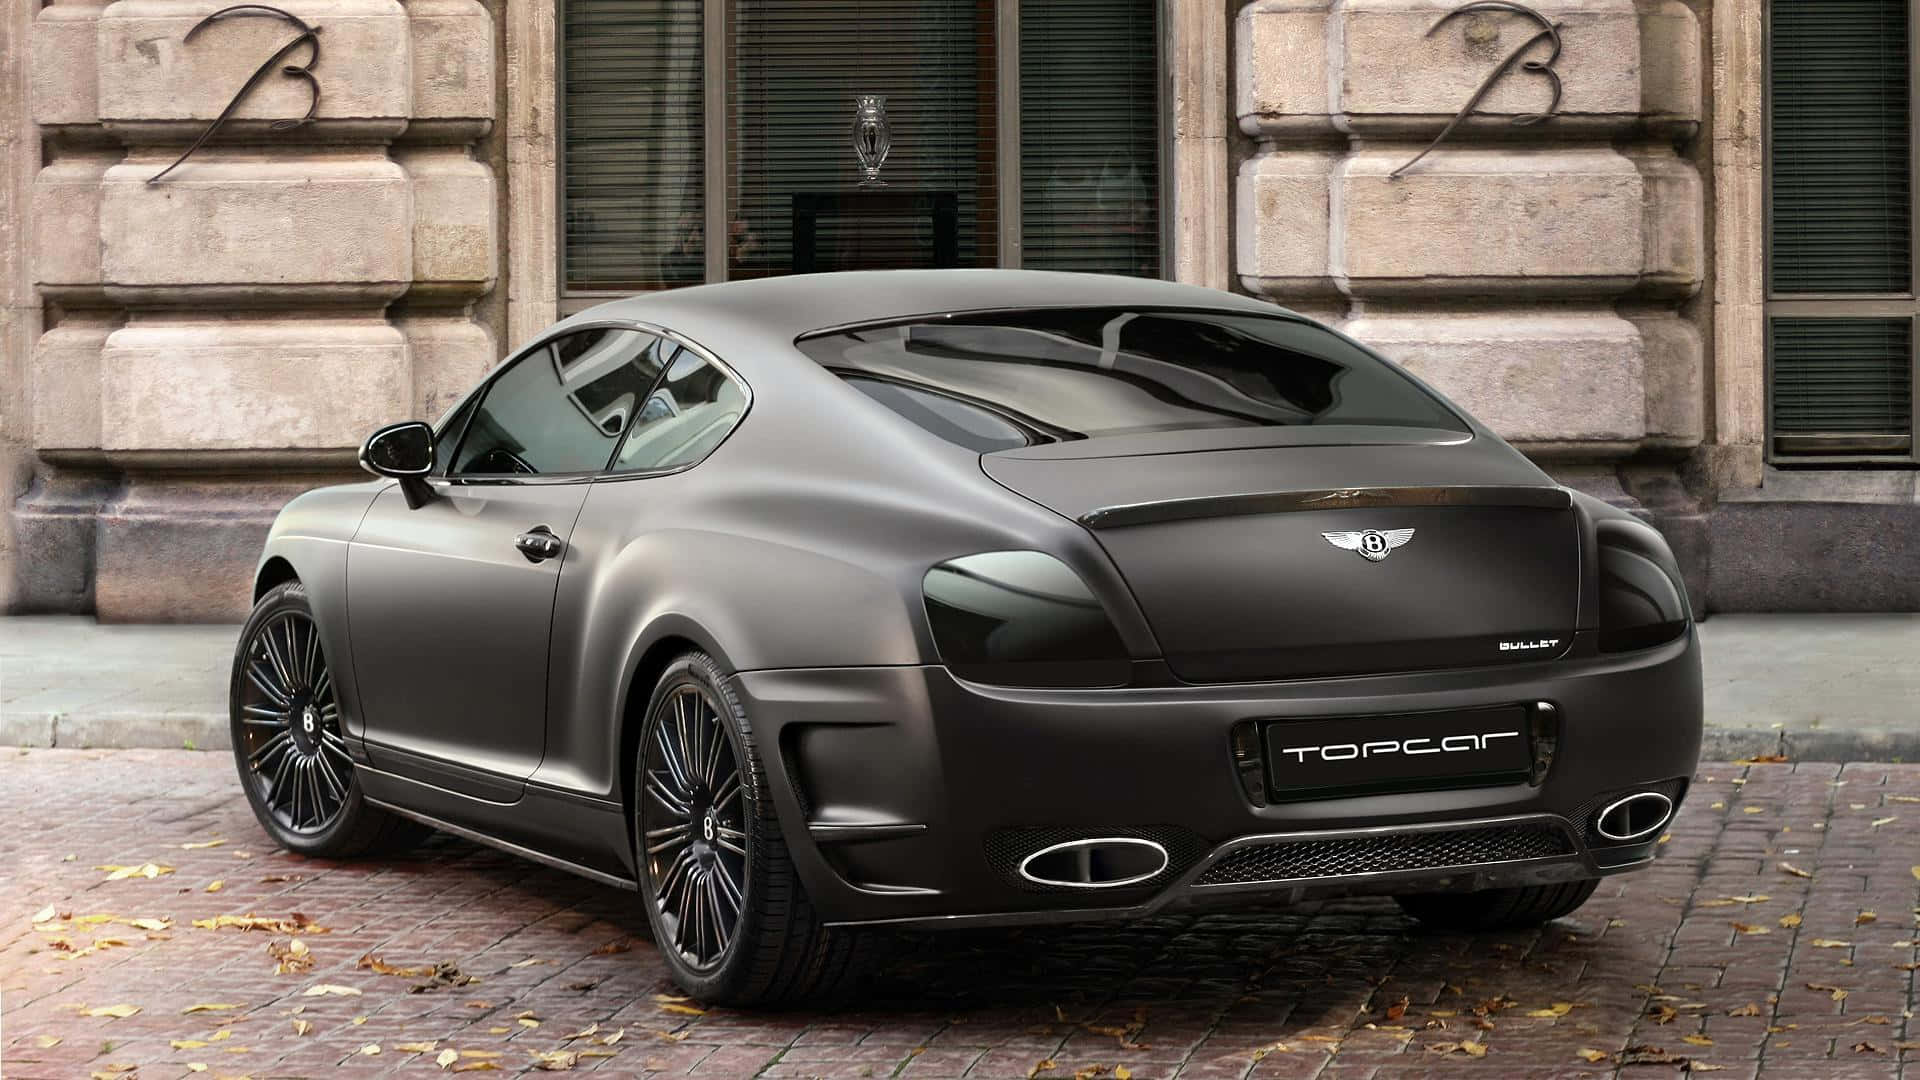 Travel in luxury and style with the Bentley Sport Wallpaper